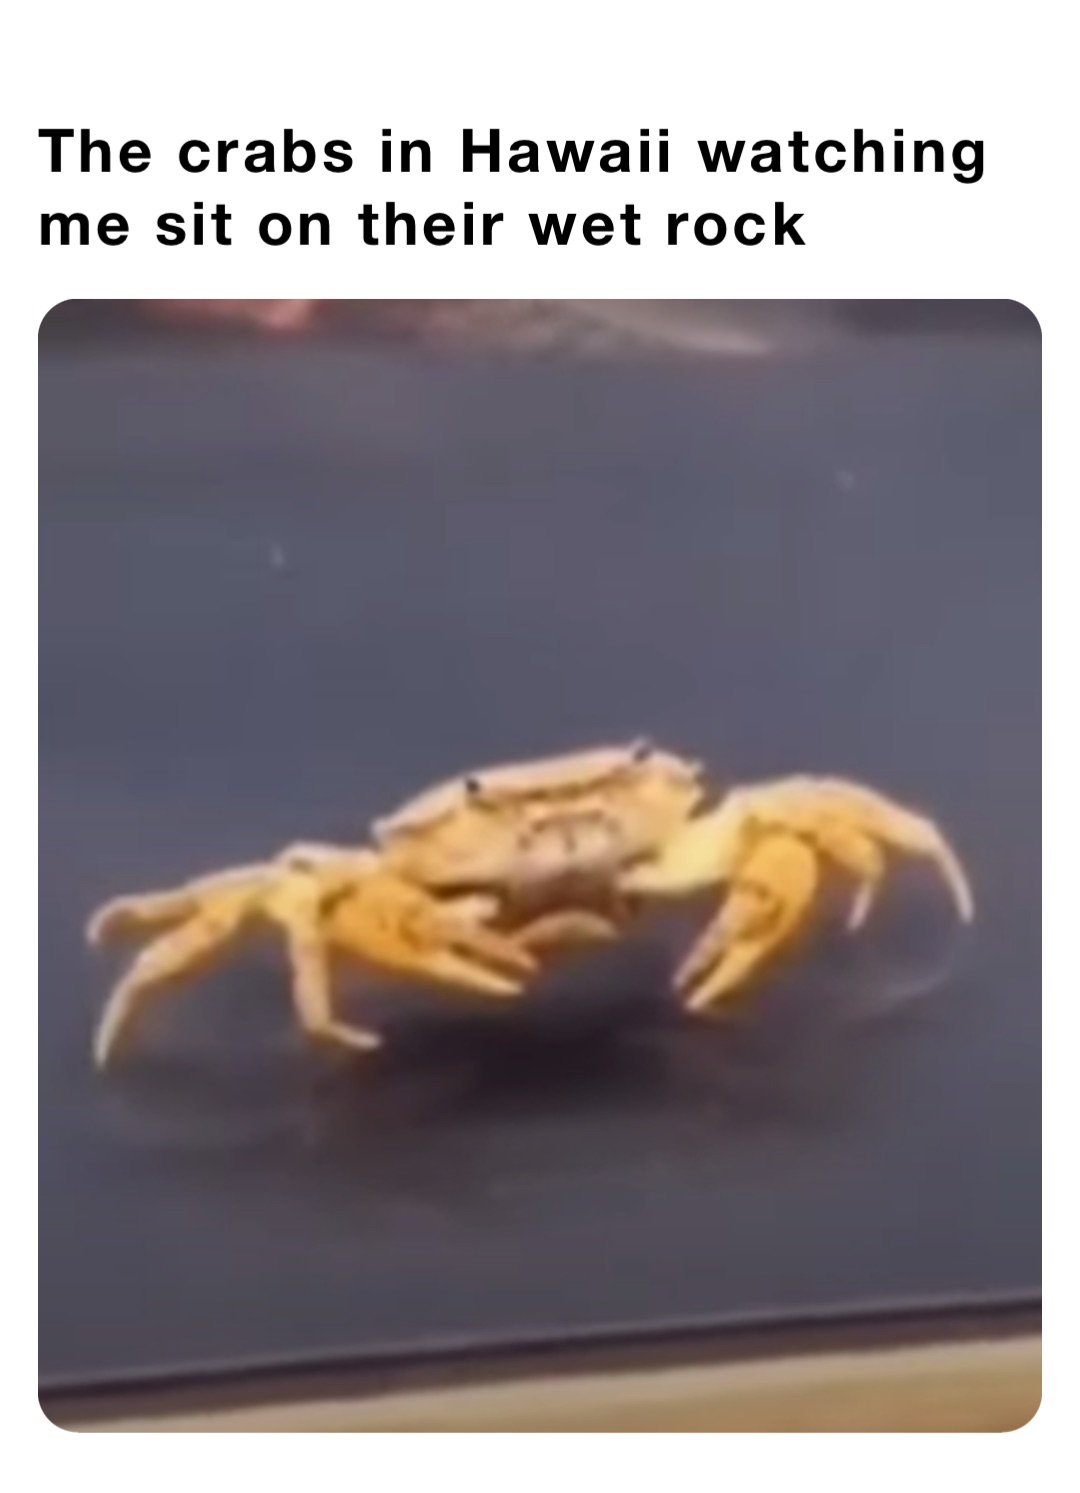 The crabs in Hawaii watching me sit on their wet rock